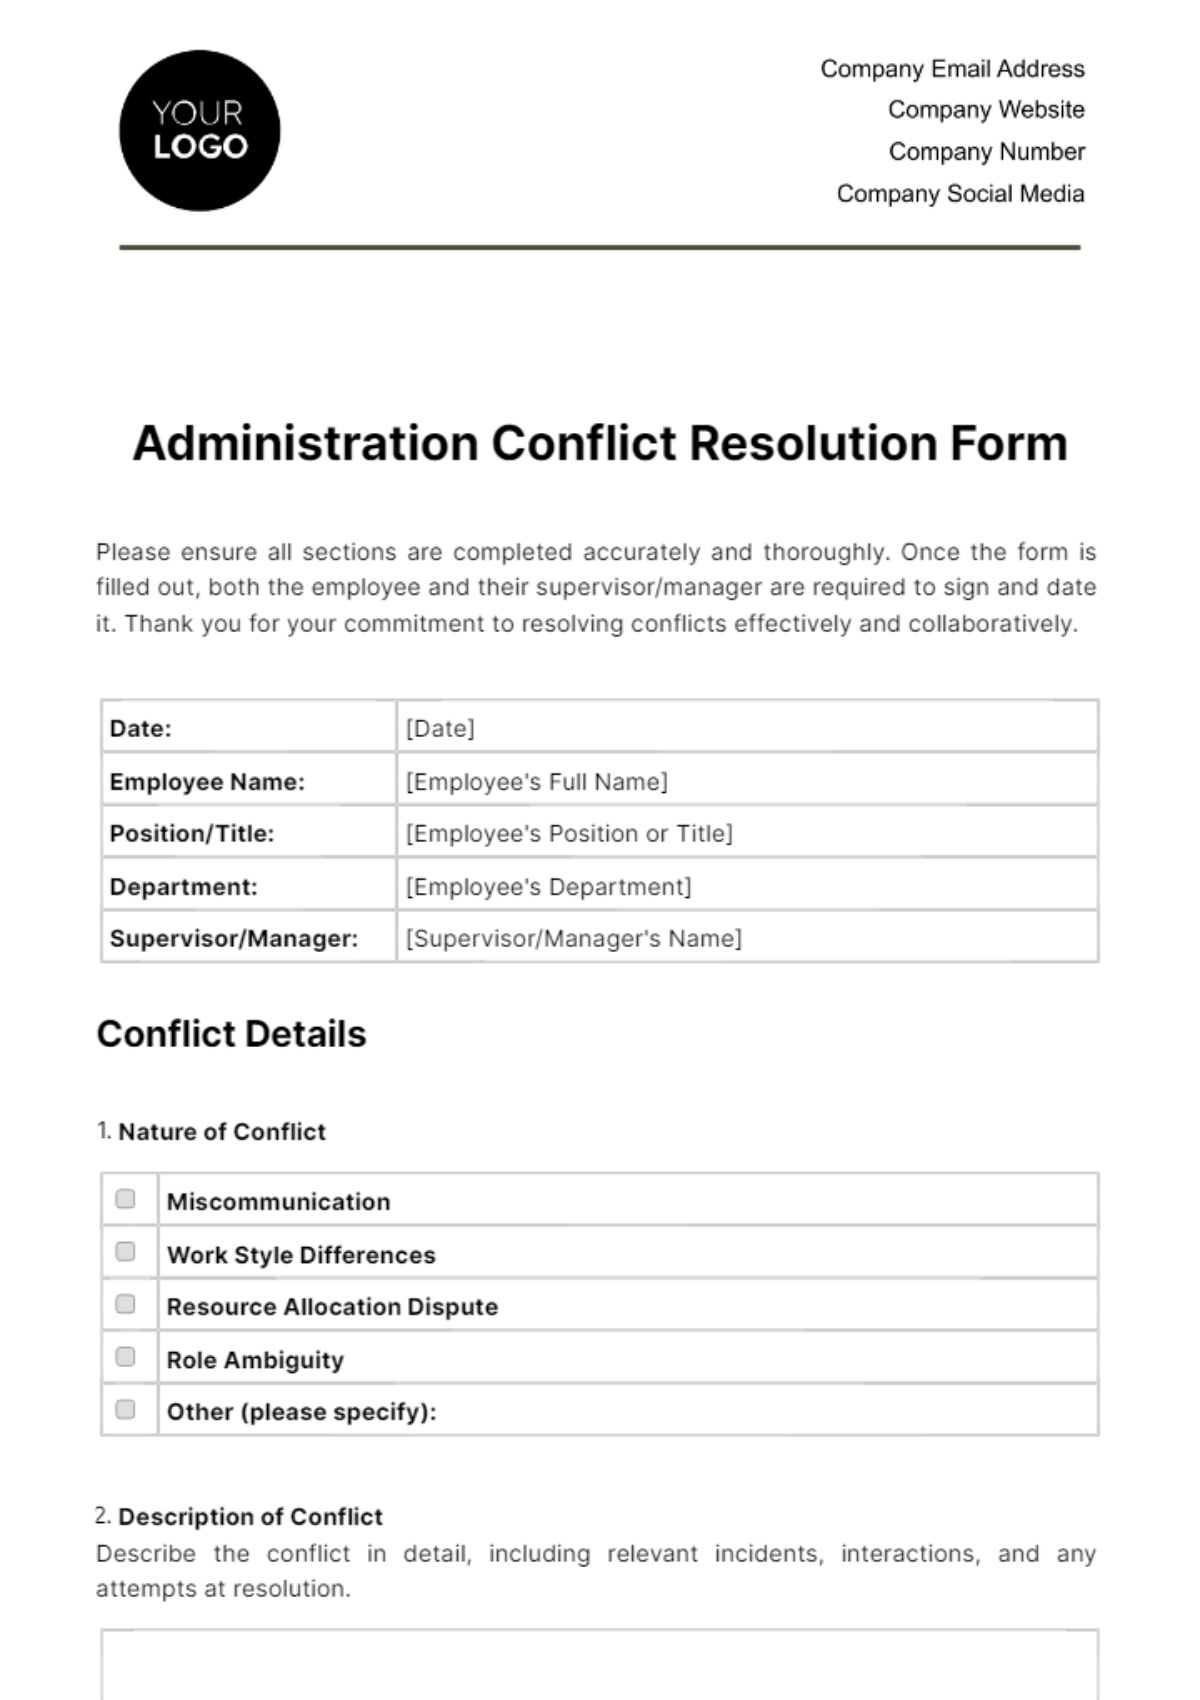 Administration Conflict Resolution Form Template